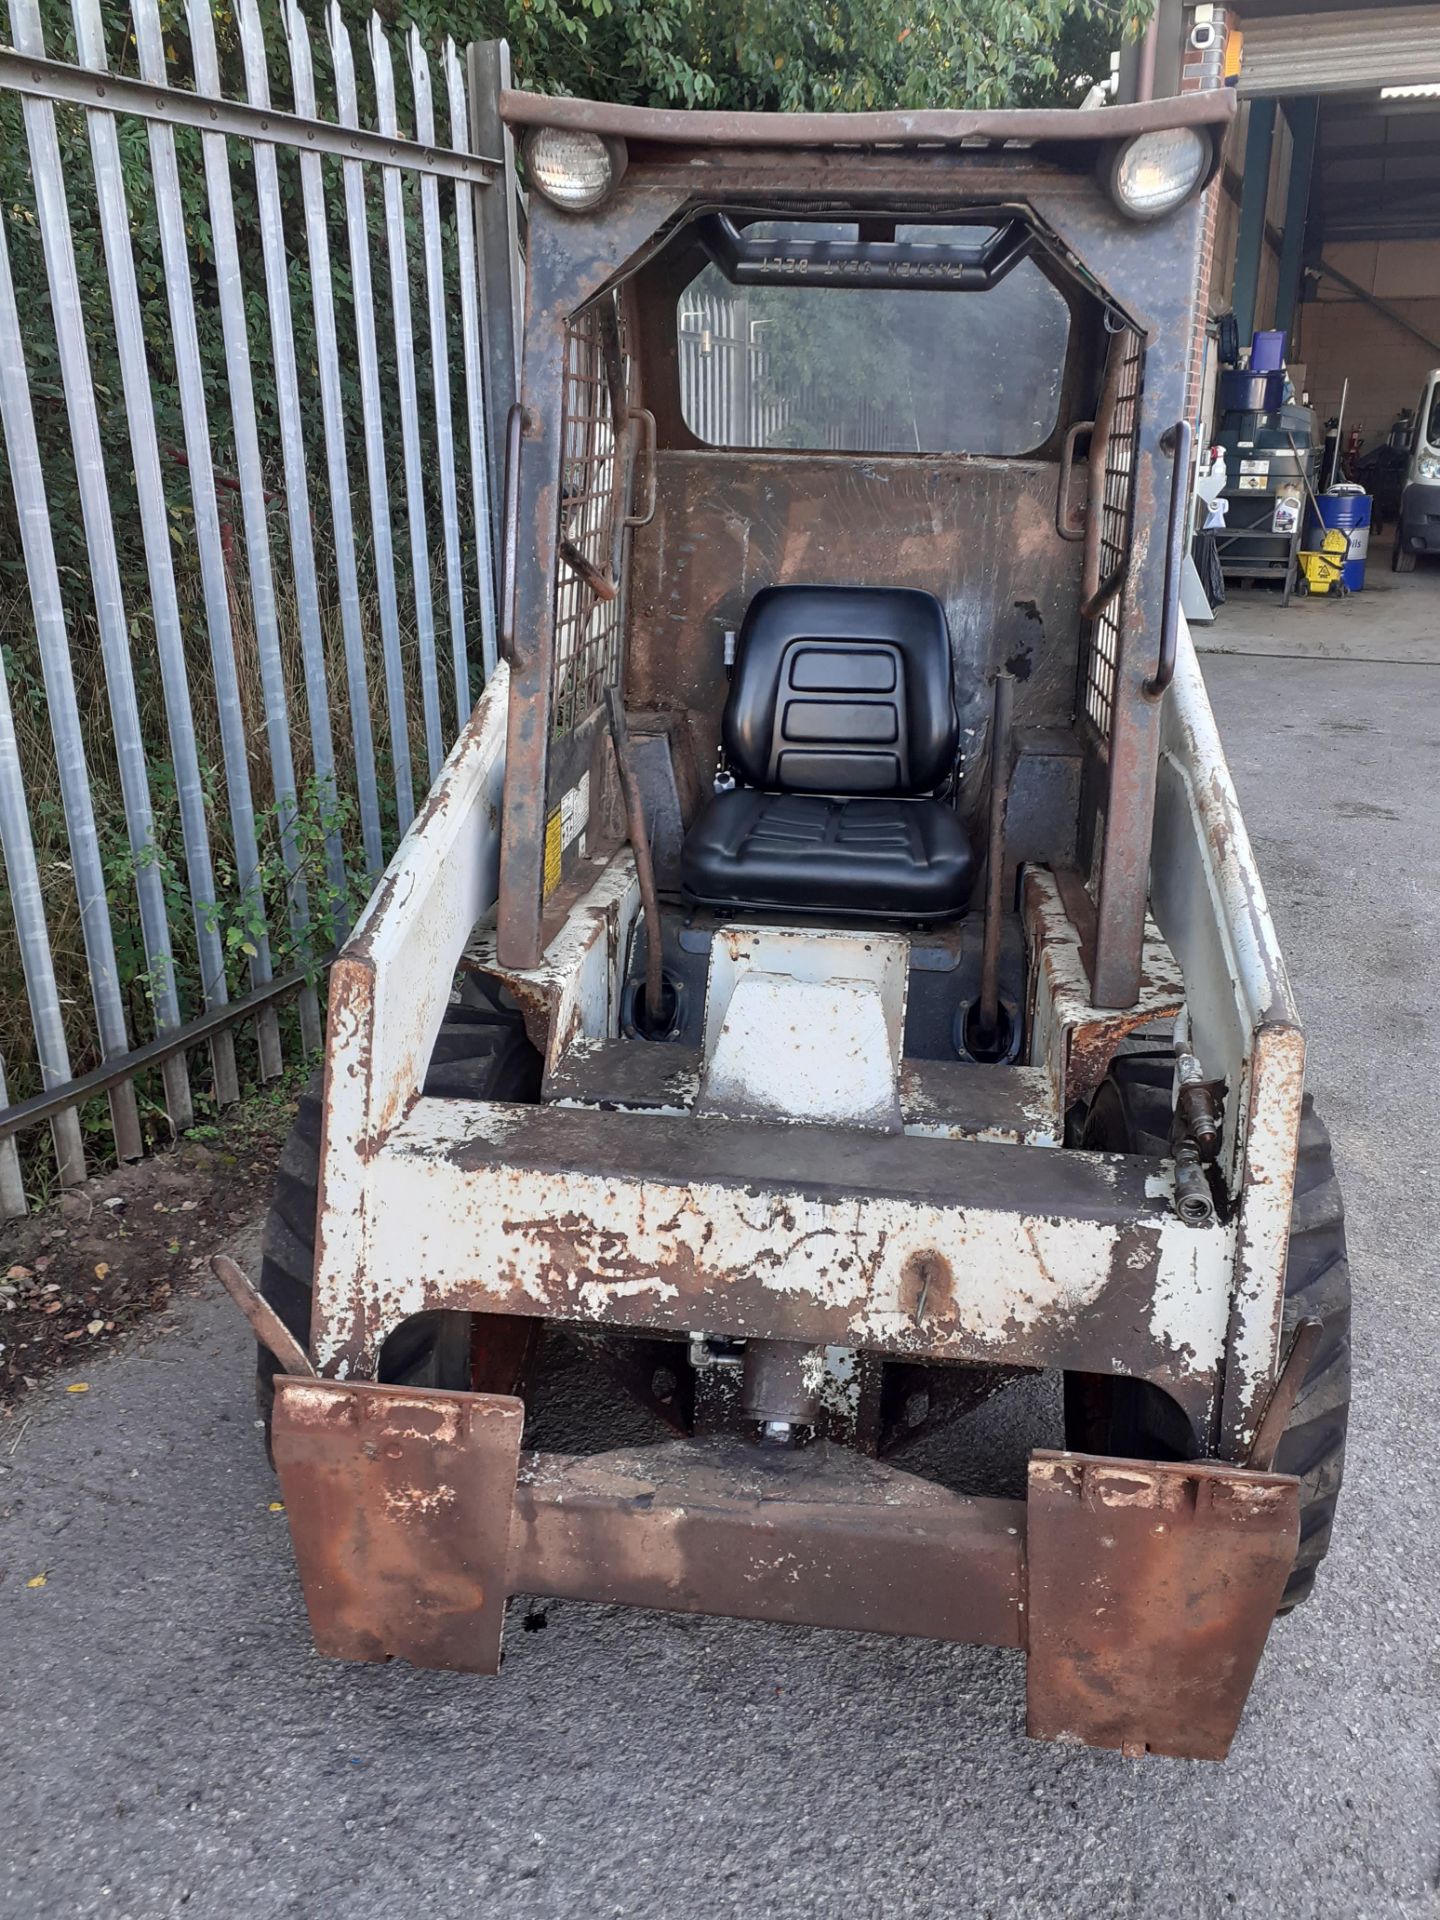 BOBCAT 643 SKID STEER, 5444 HOURS, USED CONDITION - STRAIGHT OFF A FARM *PLUS VAT* - Image 5 of 6